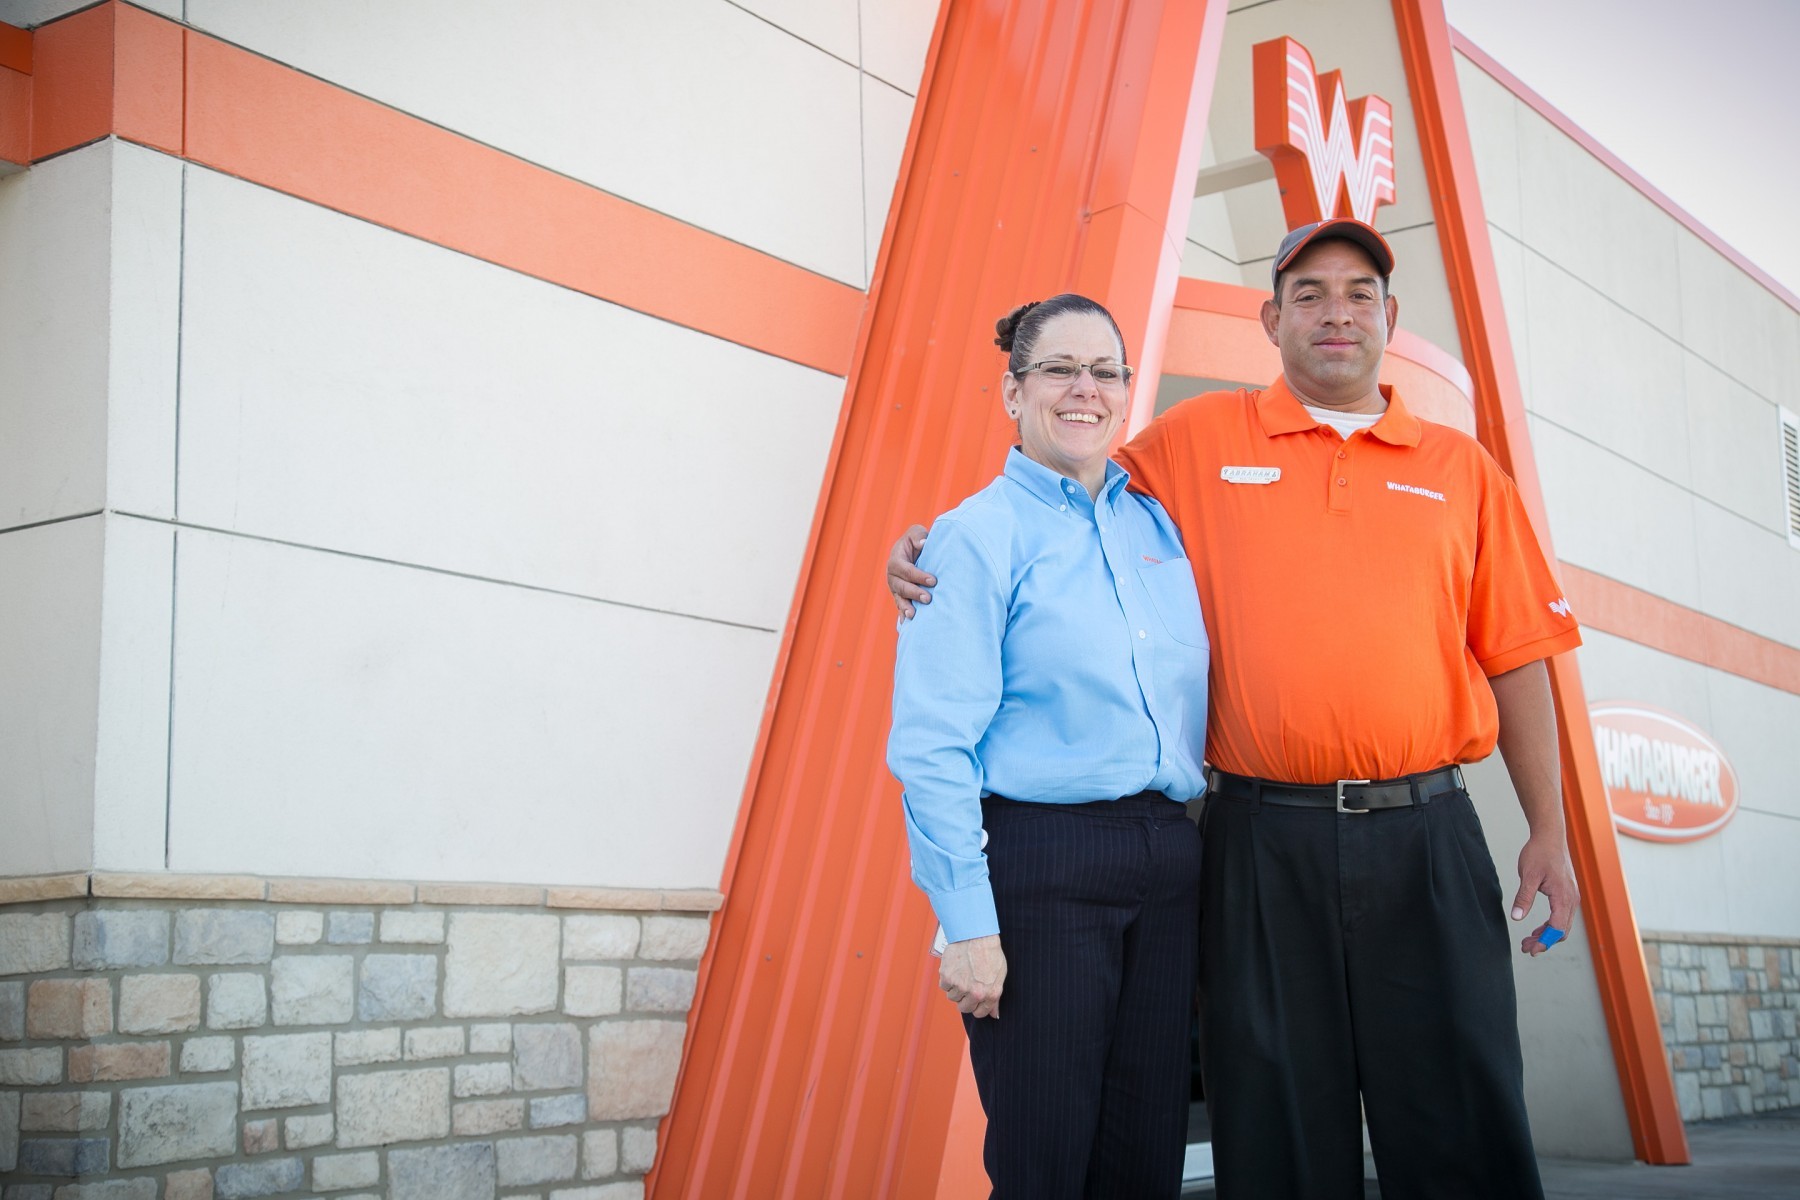 Whataburger Does Corporate Layoff, but Looks to Hire Store-Level Managers, Flavor, San Antonio